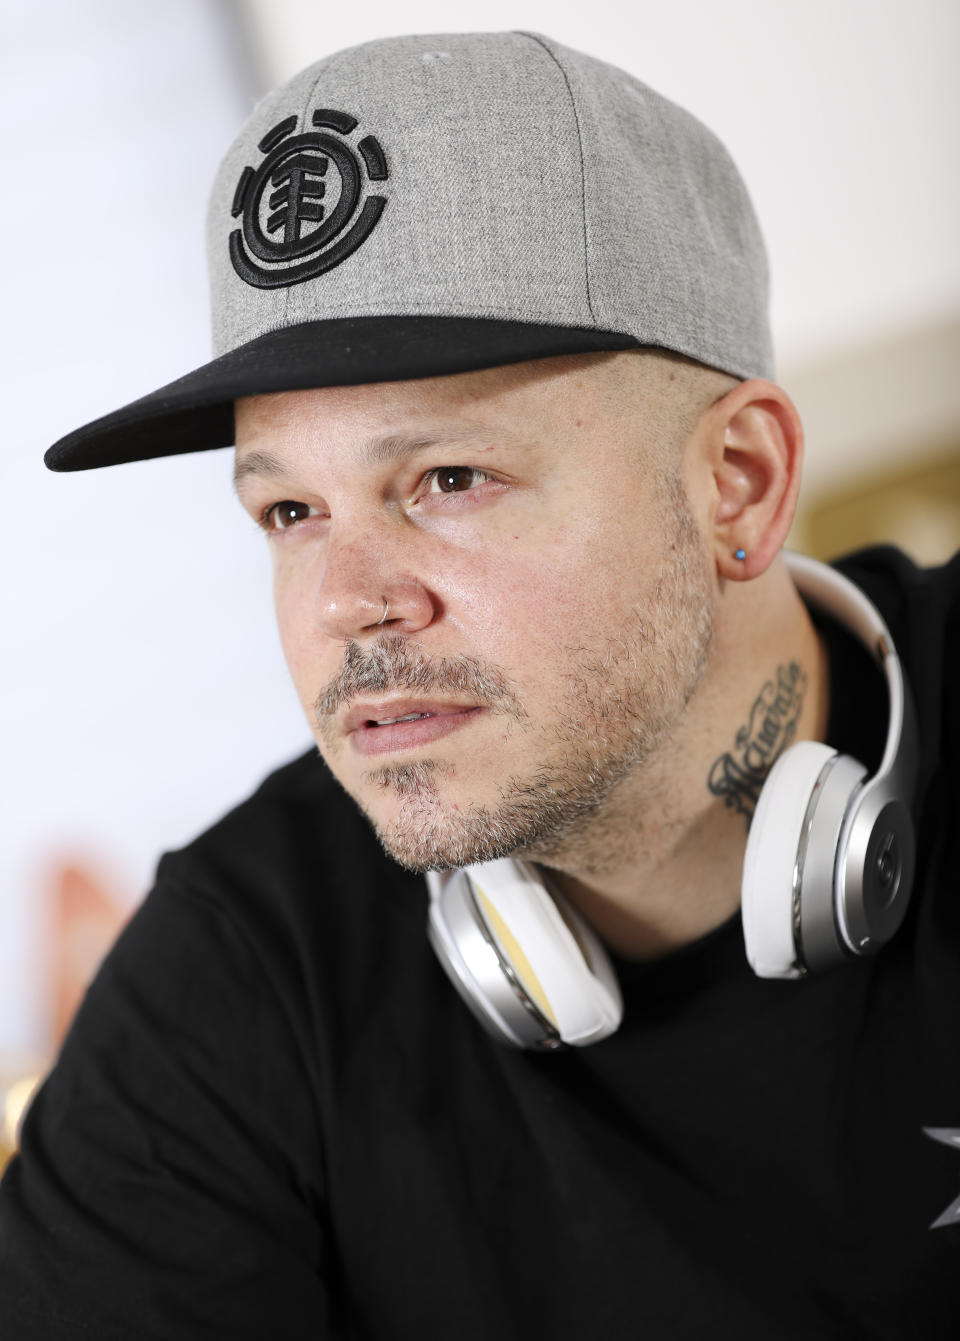 This July 12, 2019 photo shows Puerto Rican rapper, writer, and filmmaker René Pérez Joglar, known professionally as Residente, at his home in New York. Residente studied intensely with professors at Yale University and New York University to create his second solo project. The untitled album will be released in November. (Photo by Brian Ach/Invision/AP)